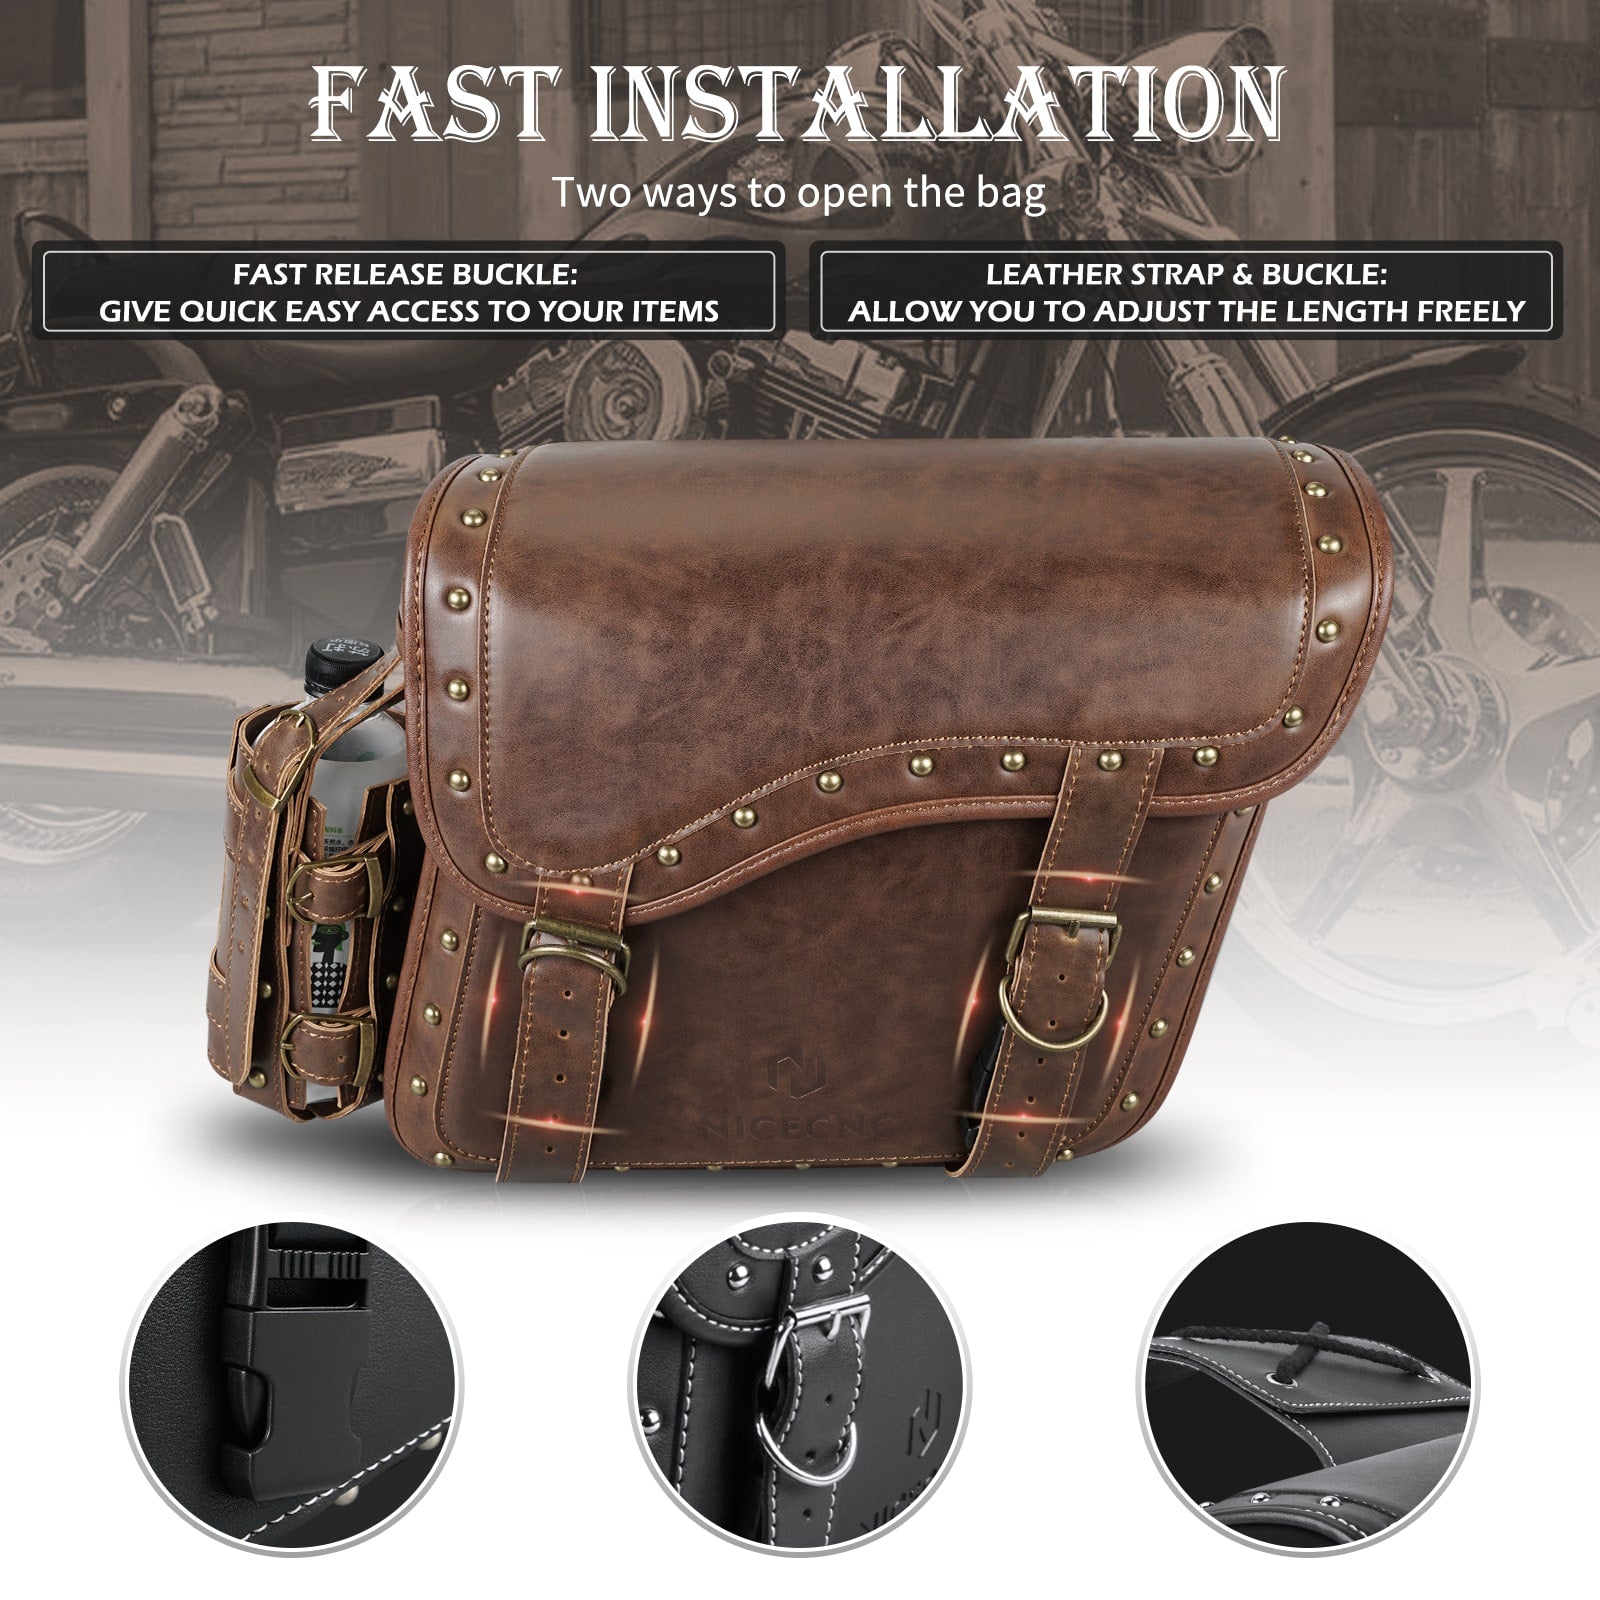 Saddle Bags PU leather Reinforced Straps & Saddle Piece with Cup Holder